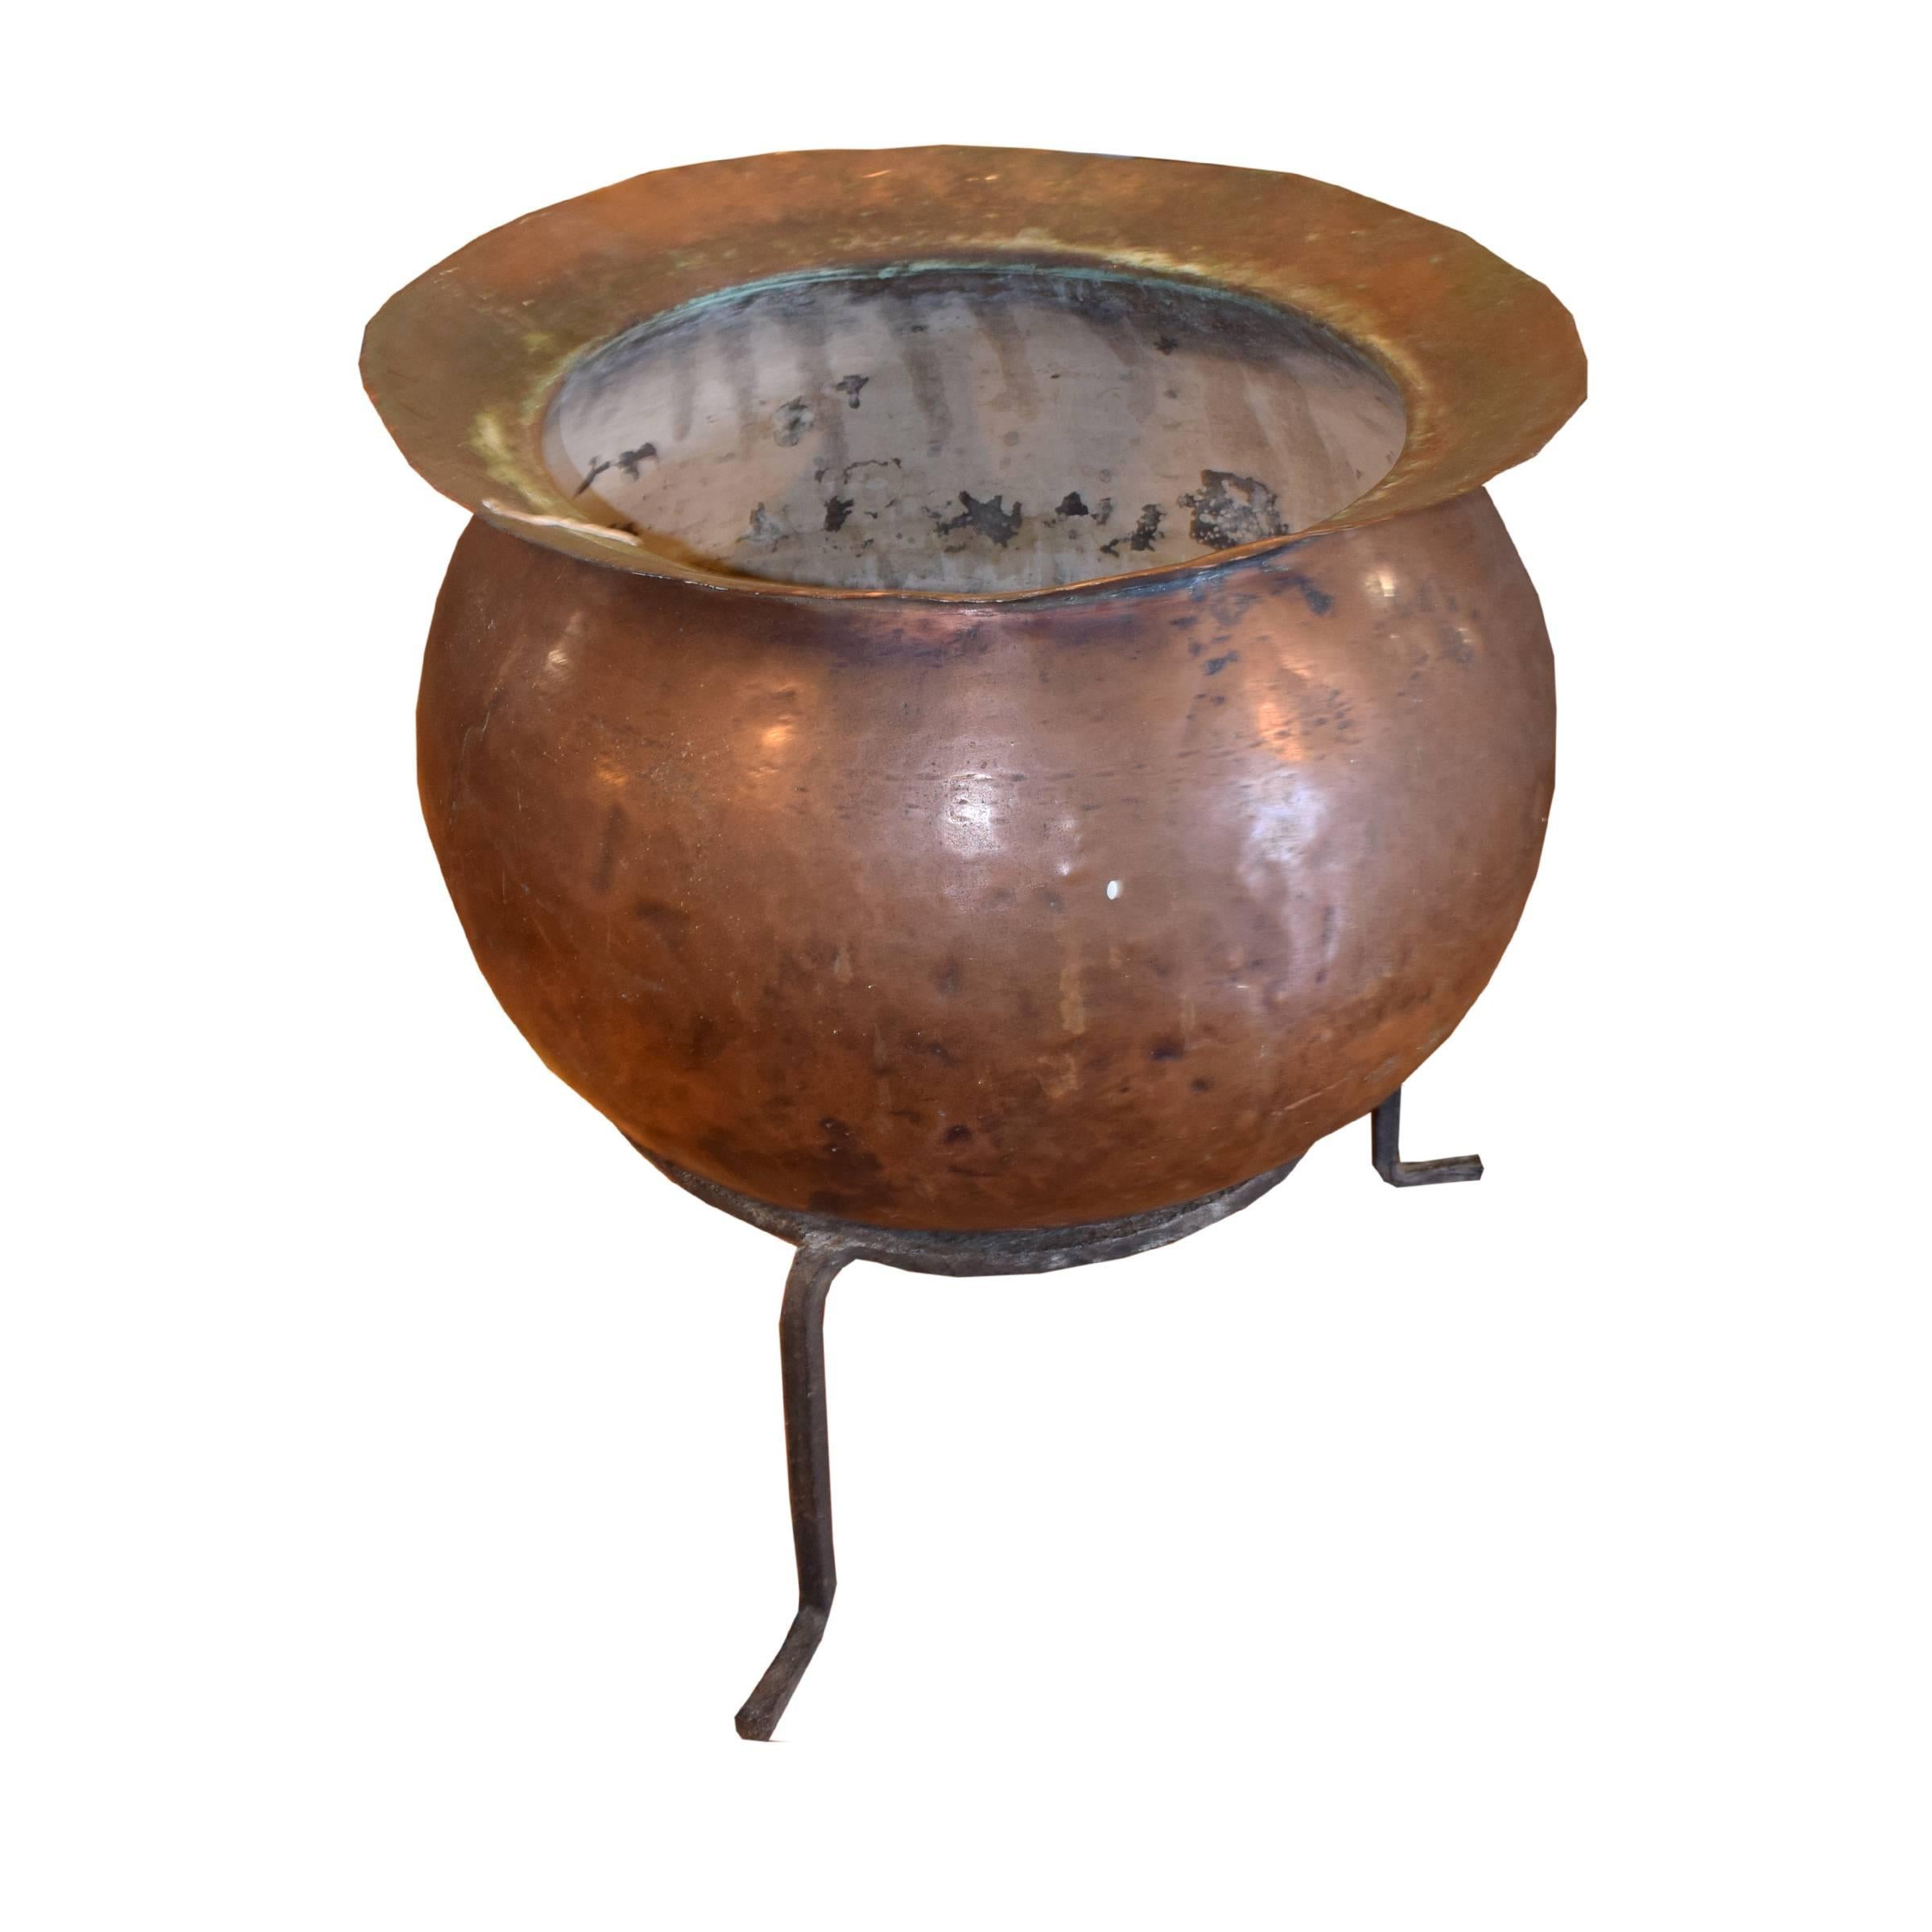 Hammered French Copper Cooking Vessel on Stand